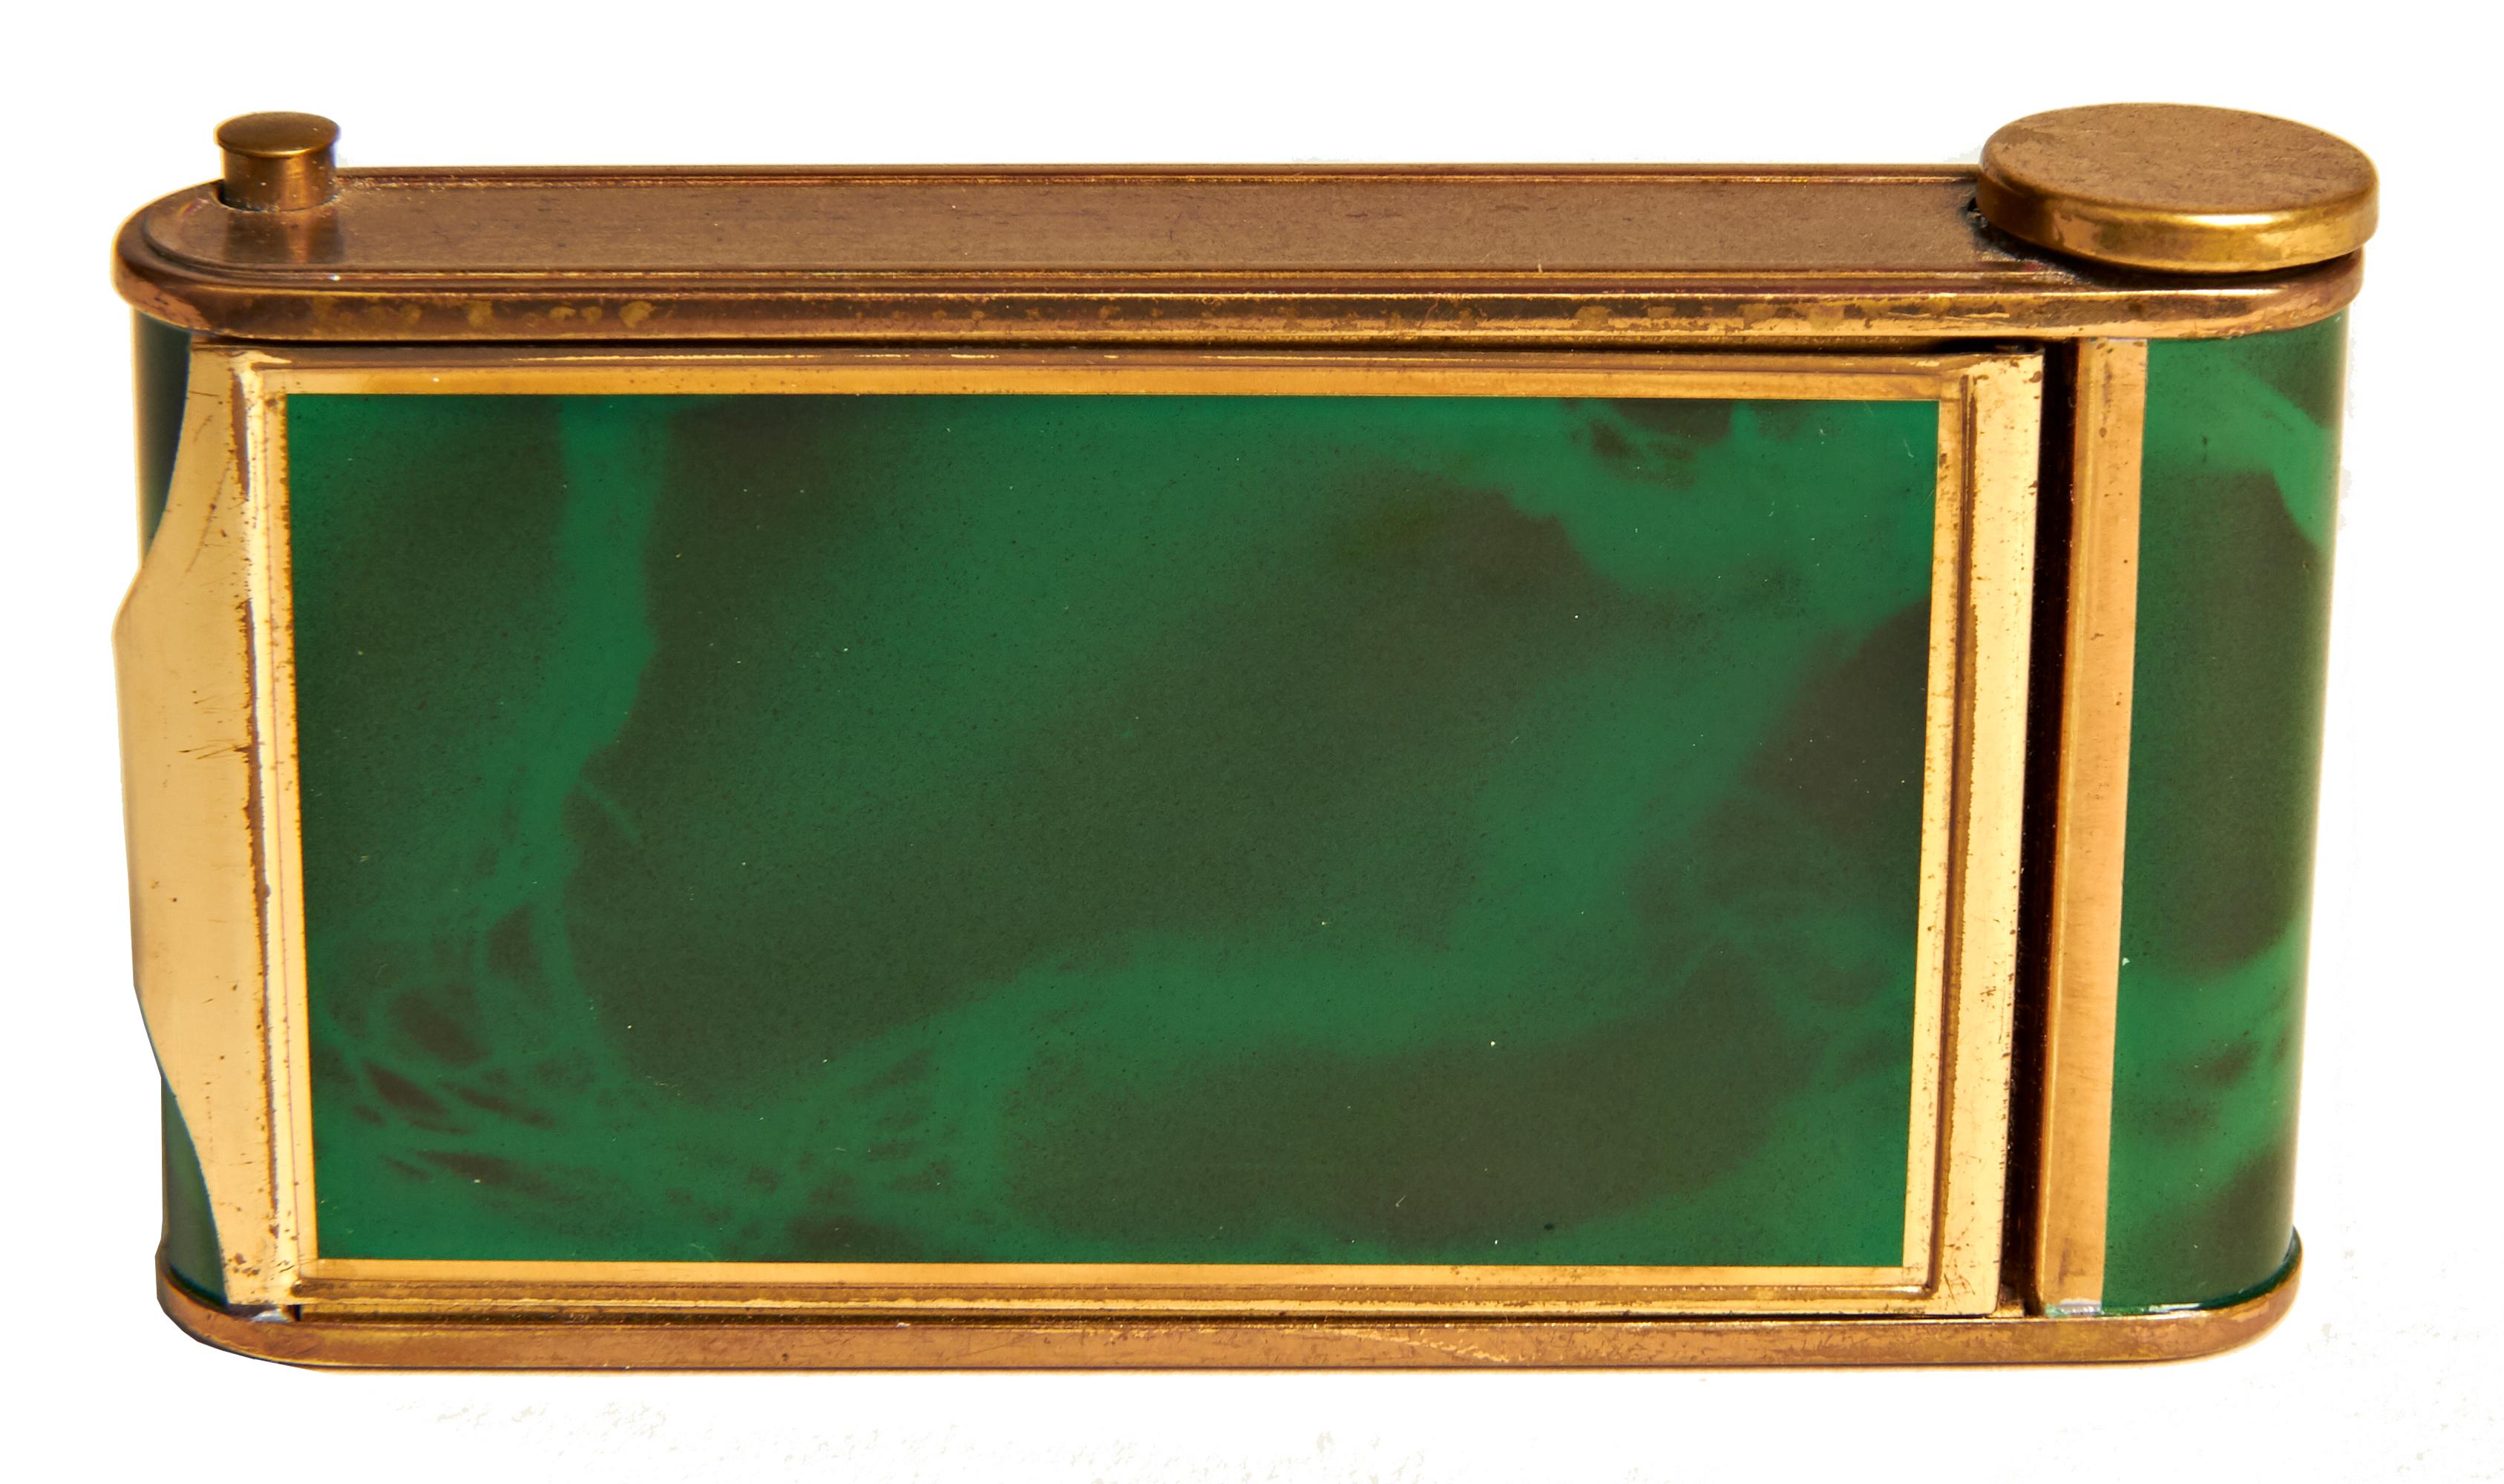 This rare geometric German Art Deco brass with green tortoiseshell enamel camera compact/minaudiere features on one side a push button powder compartment with original puff, a miniature Breitler Swiss music box and a pullout / pull-out lipstick